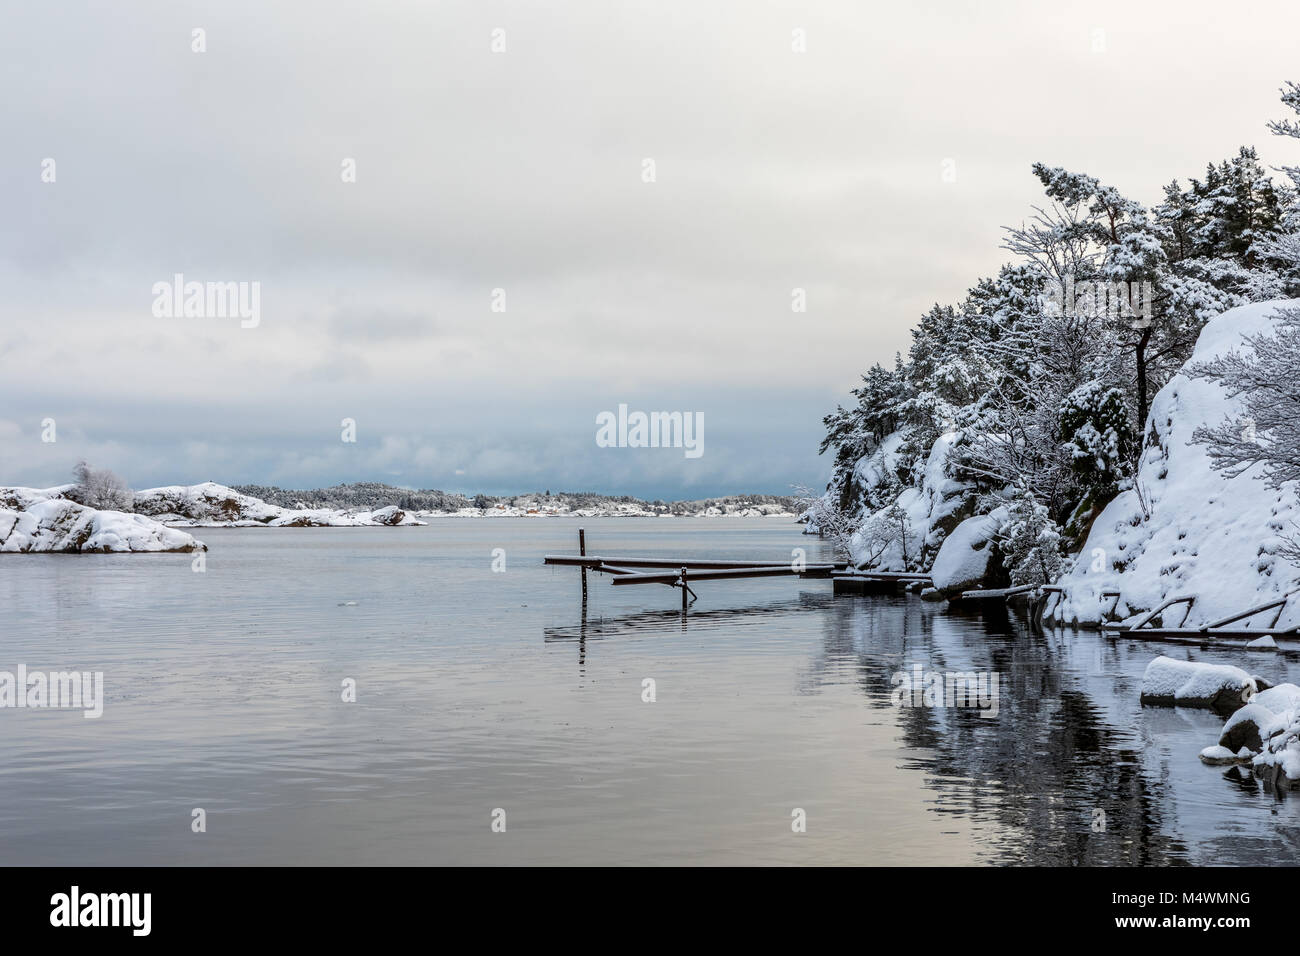 Reflections in the water. Beautiful winter day at Odderoya in Kristiansand, Norway. Trees covered in snow. Stock Photo